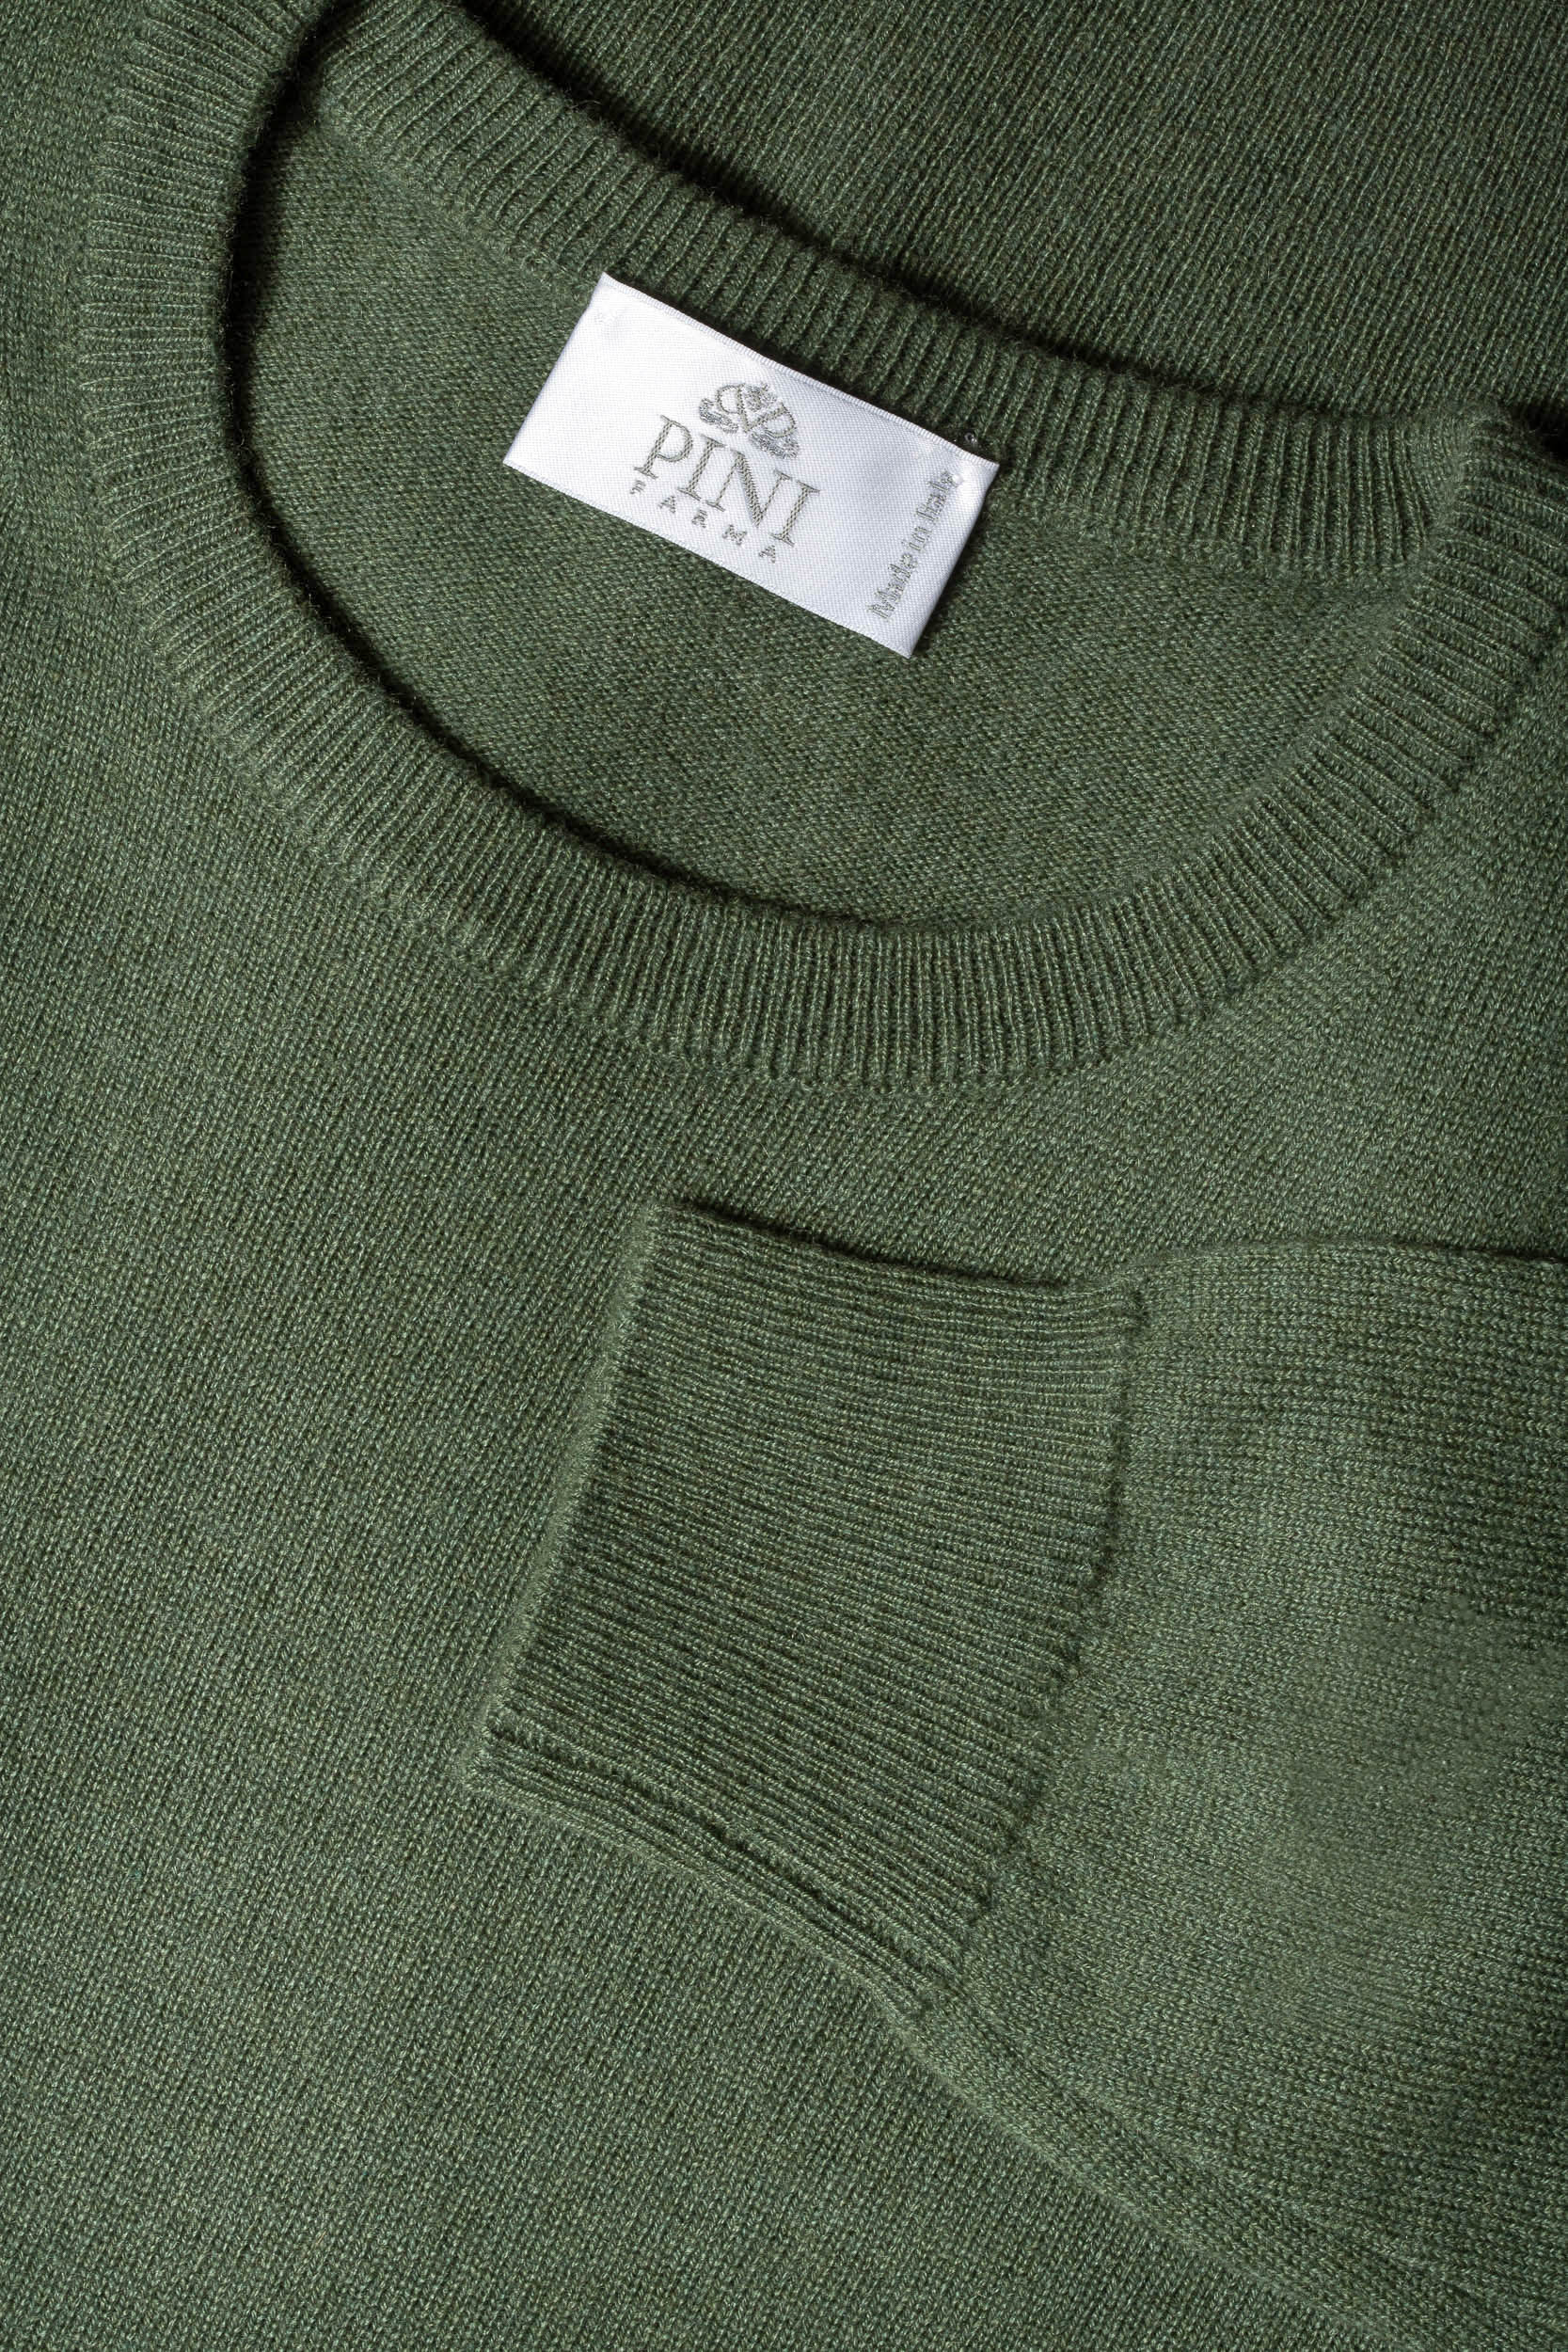 Cashmere roundneck, italian style, green roundneck, green cashmere roundneck, green knit, italian roundneck, Girocollo in cashmere, stile italiano, girocollo verde, girocollo in cashmere verde, maglia verde, girocollo italiano,  Col rond en cachemire, style italien, col rond vert, col rond en cachemire vert, maille verte, col rond italien, 